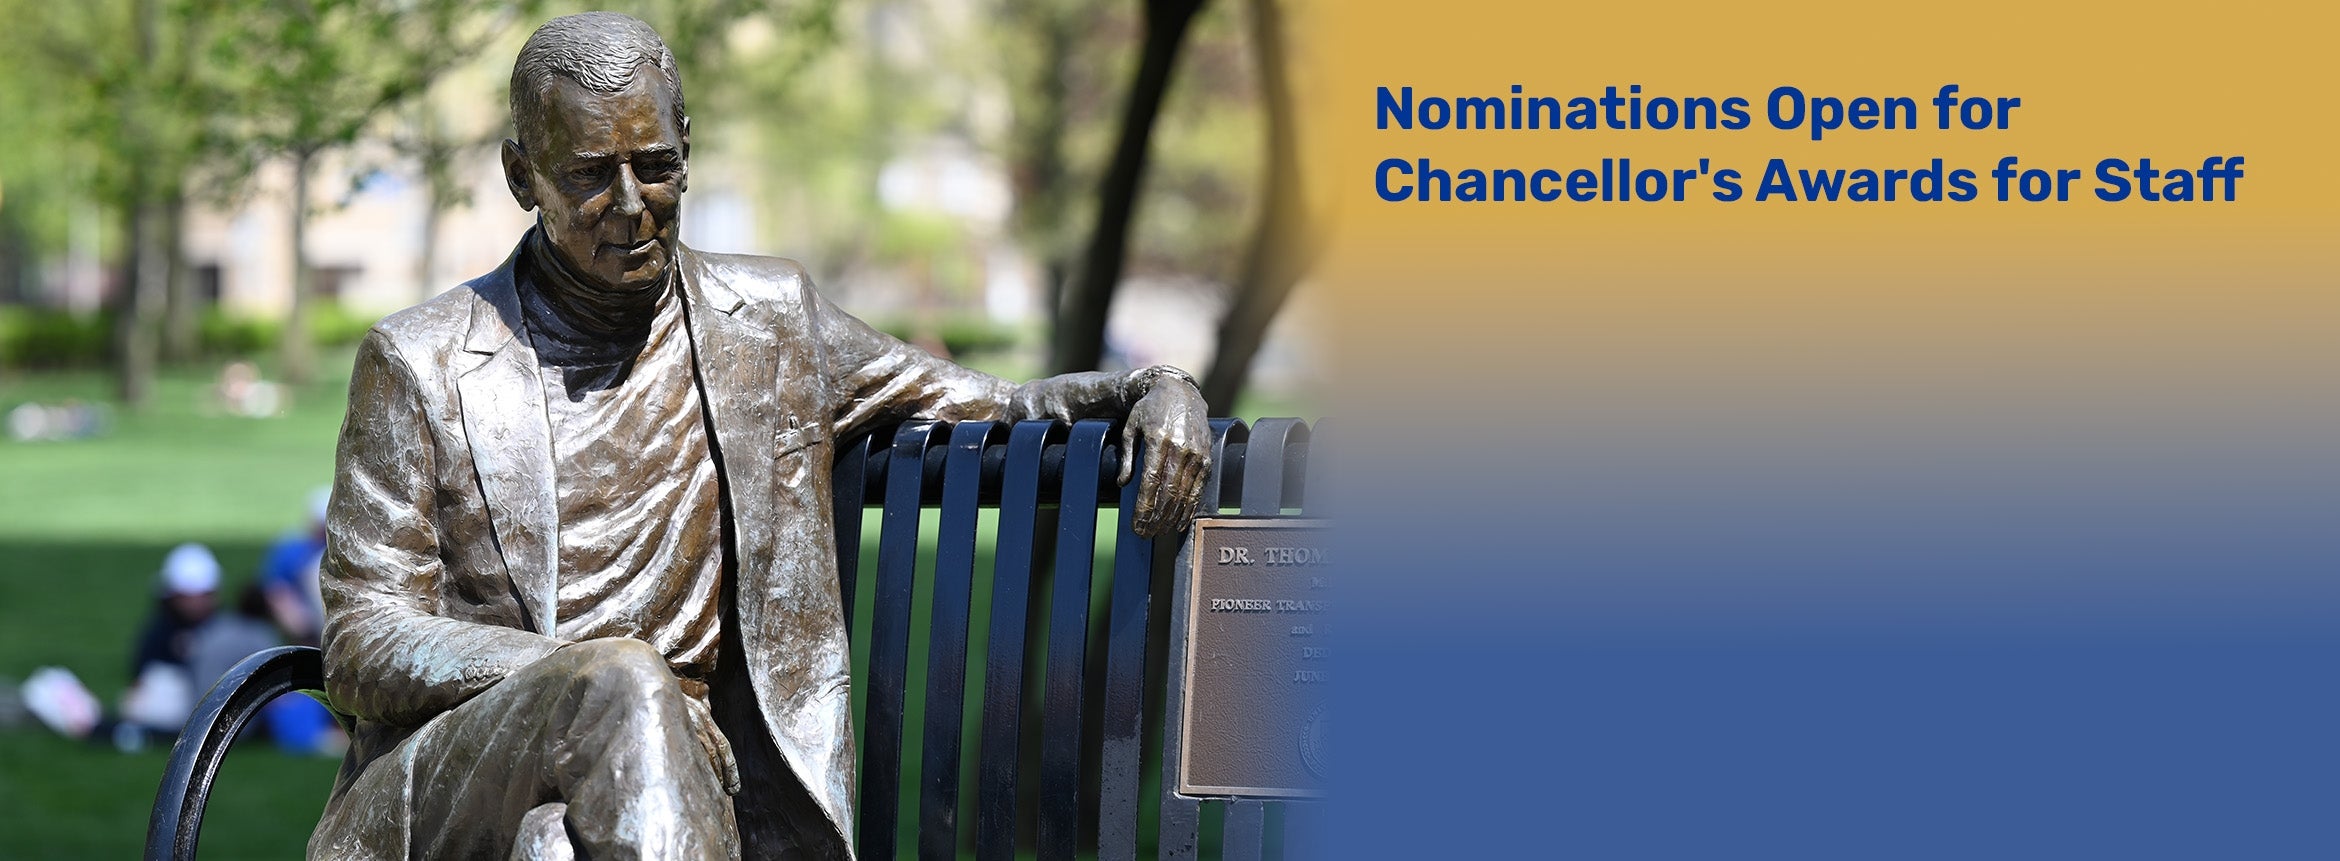 Statue of Dr. Thomas Starzl outside Pitt's Cathedral of Learning with text overlay: Nominations Open for Chancellor's Awards for Staff